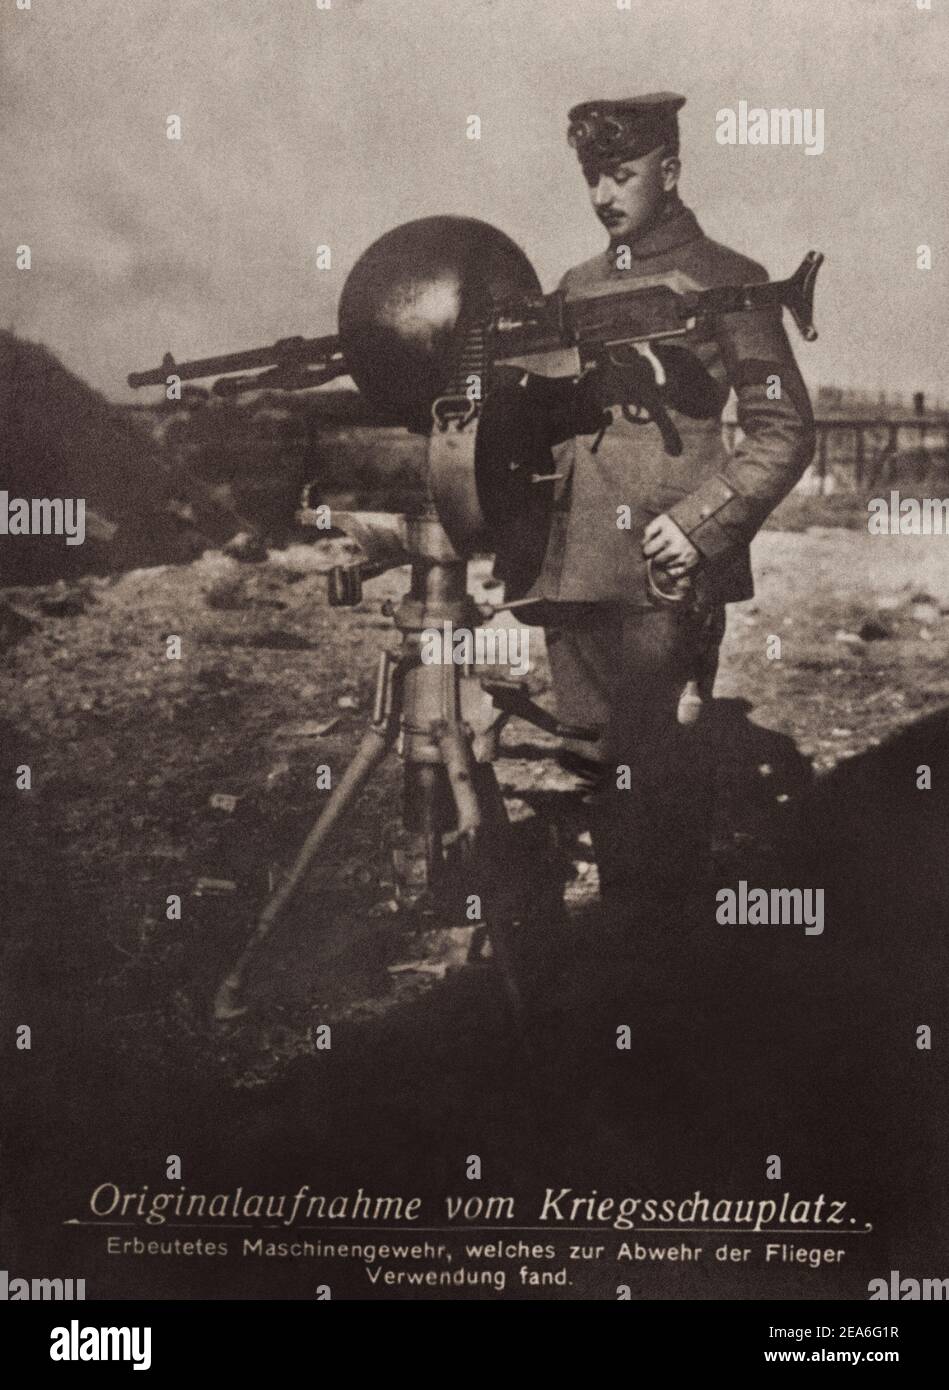 Old image from World War I. Captured machine gun, which was used to defend the aviators Stock Photo